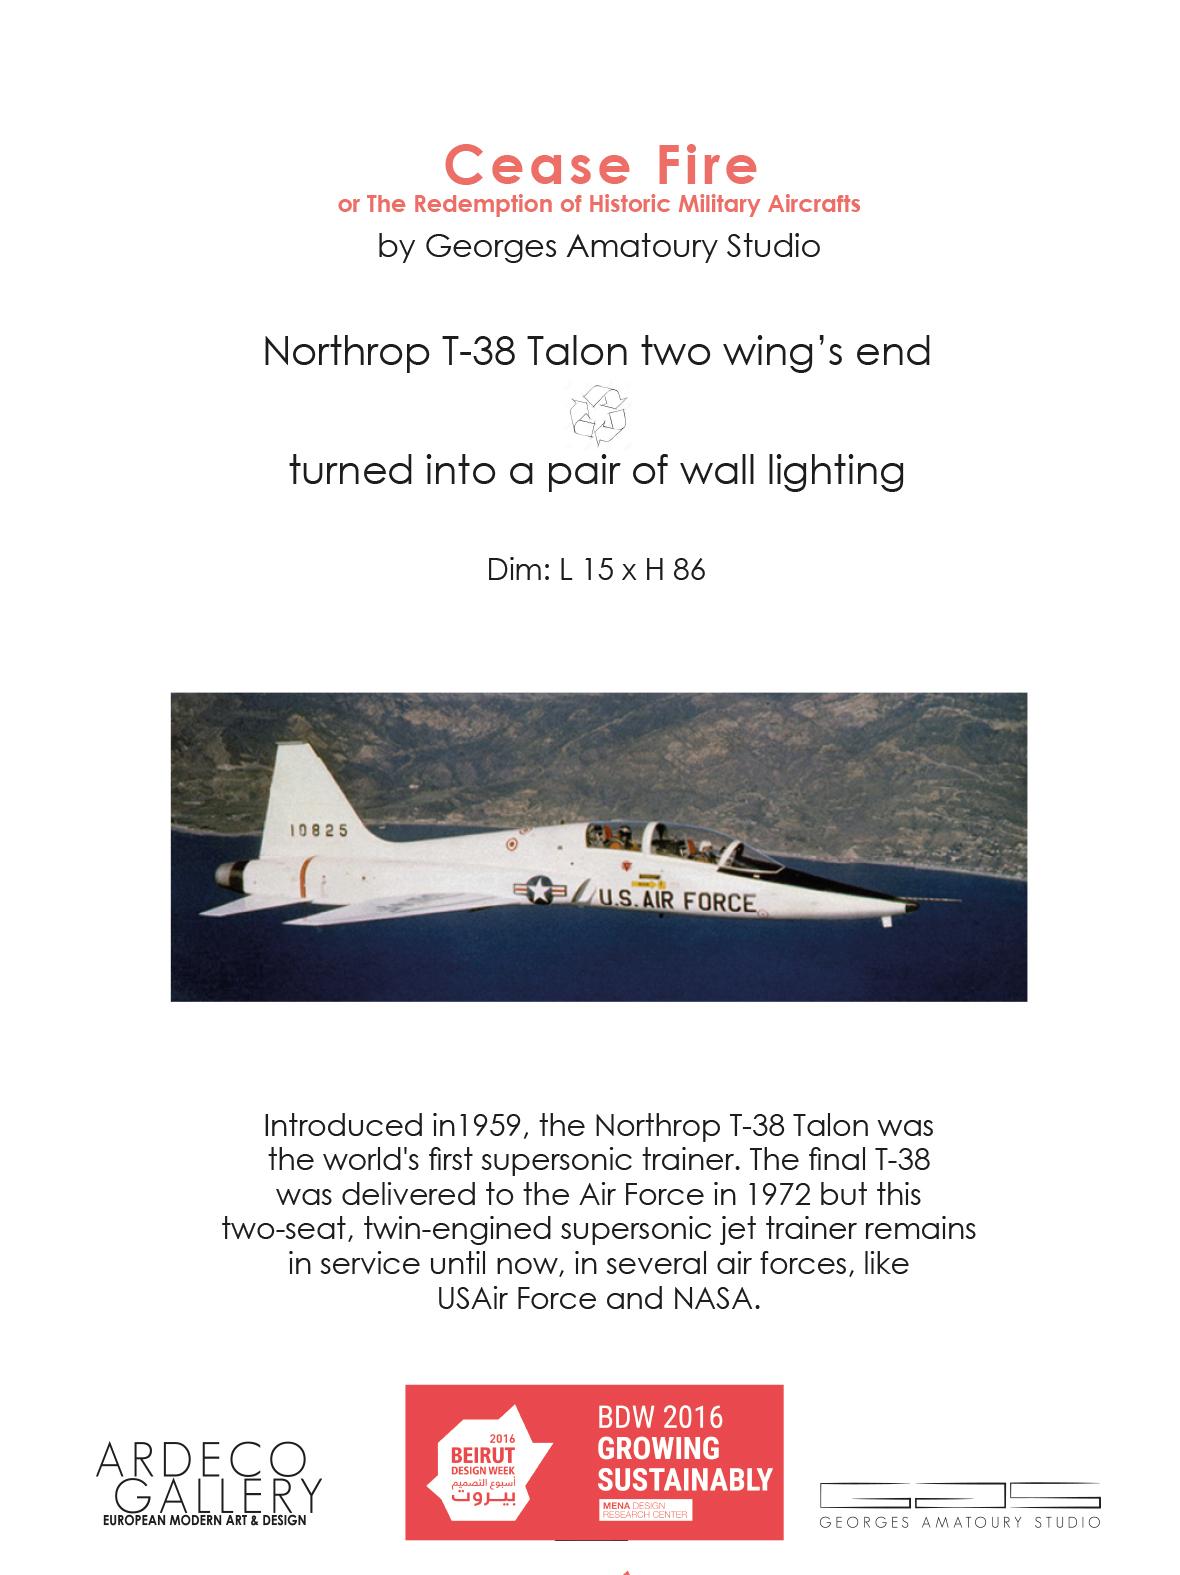 Modern Cease Fire Wall Lamp, Repurposed Northrop T-38 Talon, Pair of Wing Ends